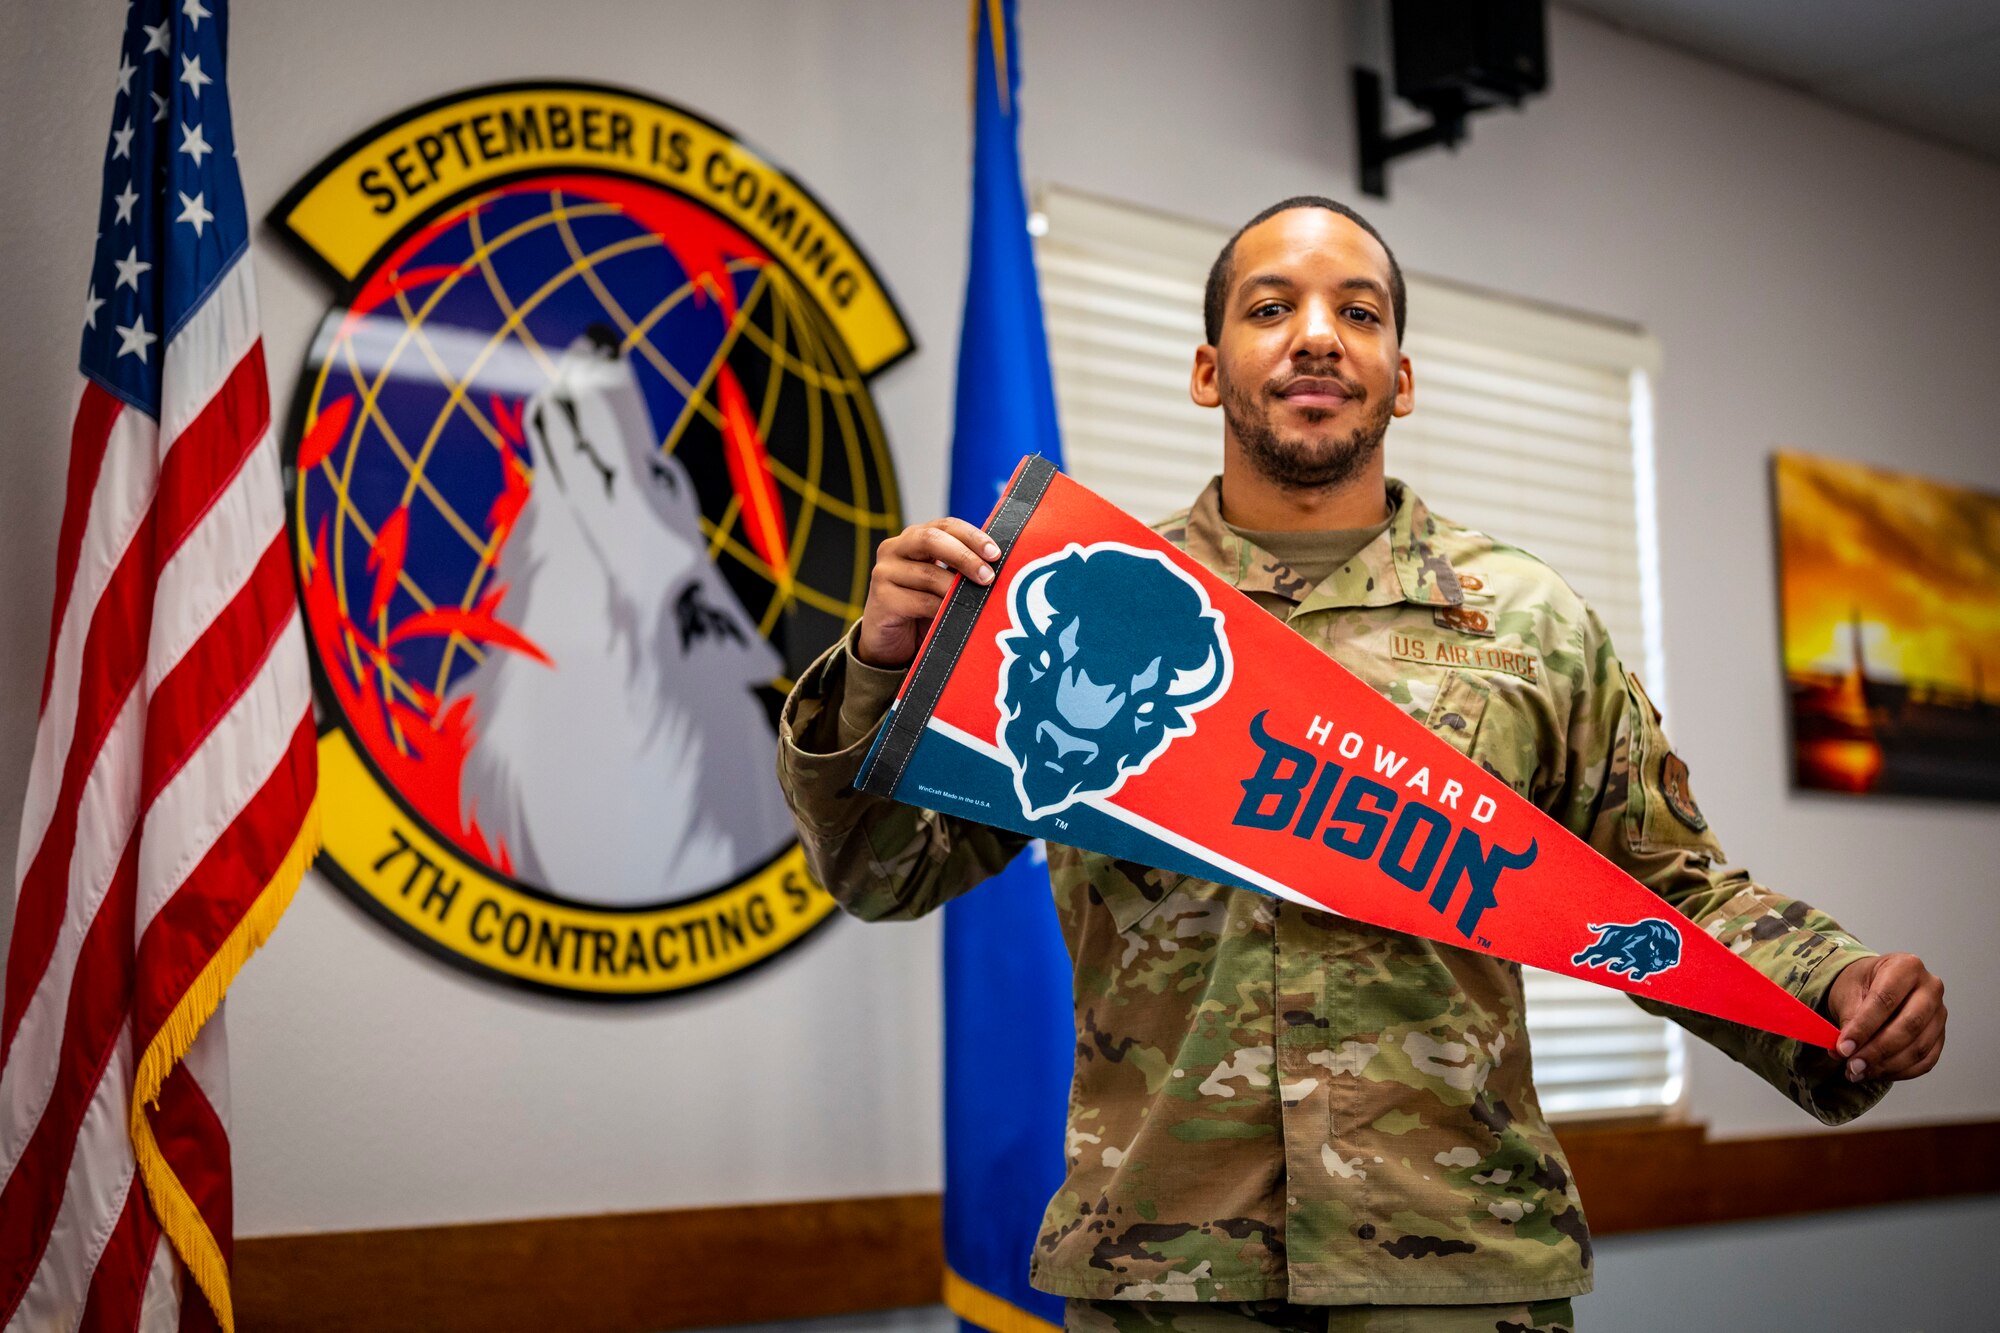 U.S. Air Force 2nd Lt. Dwight Williams, 7th Contracting Squadron Base Commodities Flight officer in charge, holds up a Howard University flag during Black History Month at Dyess Air Force Base, Texas, Feb. 22, 2023. Williams currently serves as the lead officer for the Dyess Diversity & Inclusion Committee and the Vice President of the Dyess African American Heritage Committee, hosting multiple events during his time at Dyess. He is a Big Brother in the Big Brothers Big Sisters program and spends his spare time as a disk jockey attending multiple events throughout the community, offering his musical knowledge and event coordination skills. (U.S. Air Force photo by Senior Airman Leon Redfern)